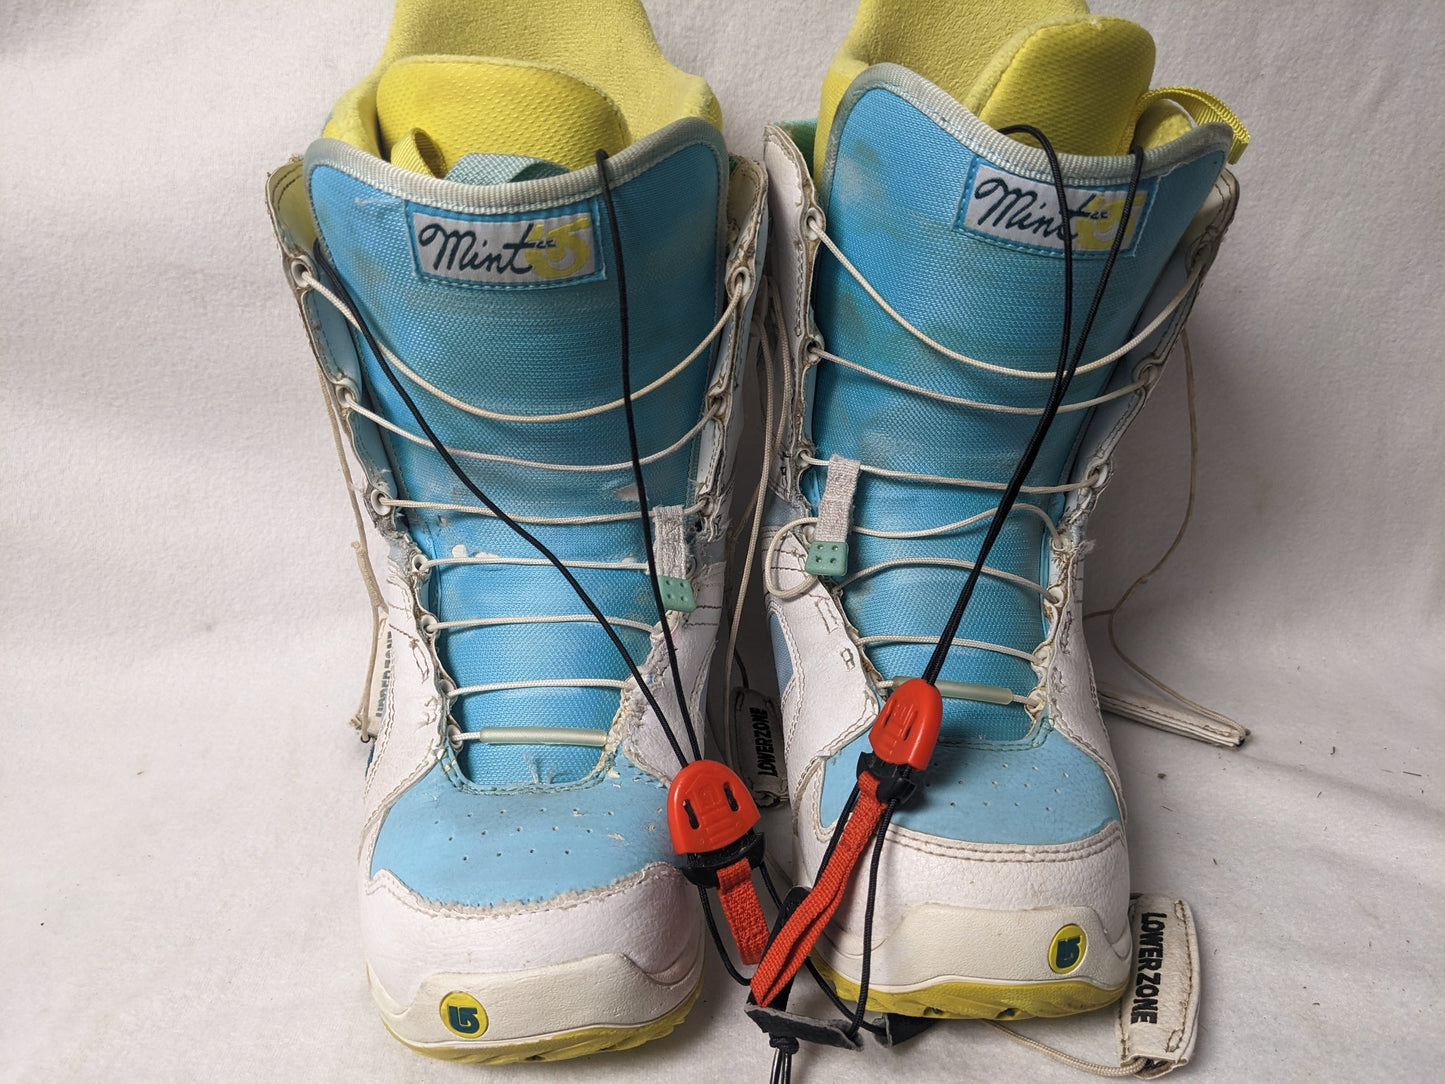 Burton Mint Women's Snowboard Boots Size Women's 6.5 Color White Condition Used